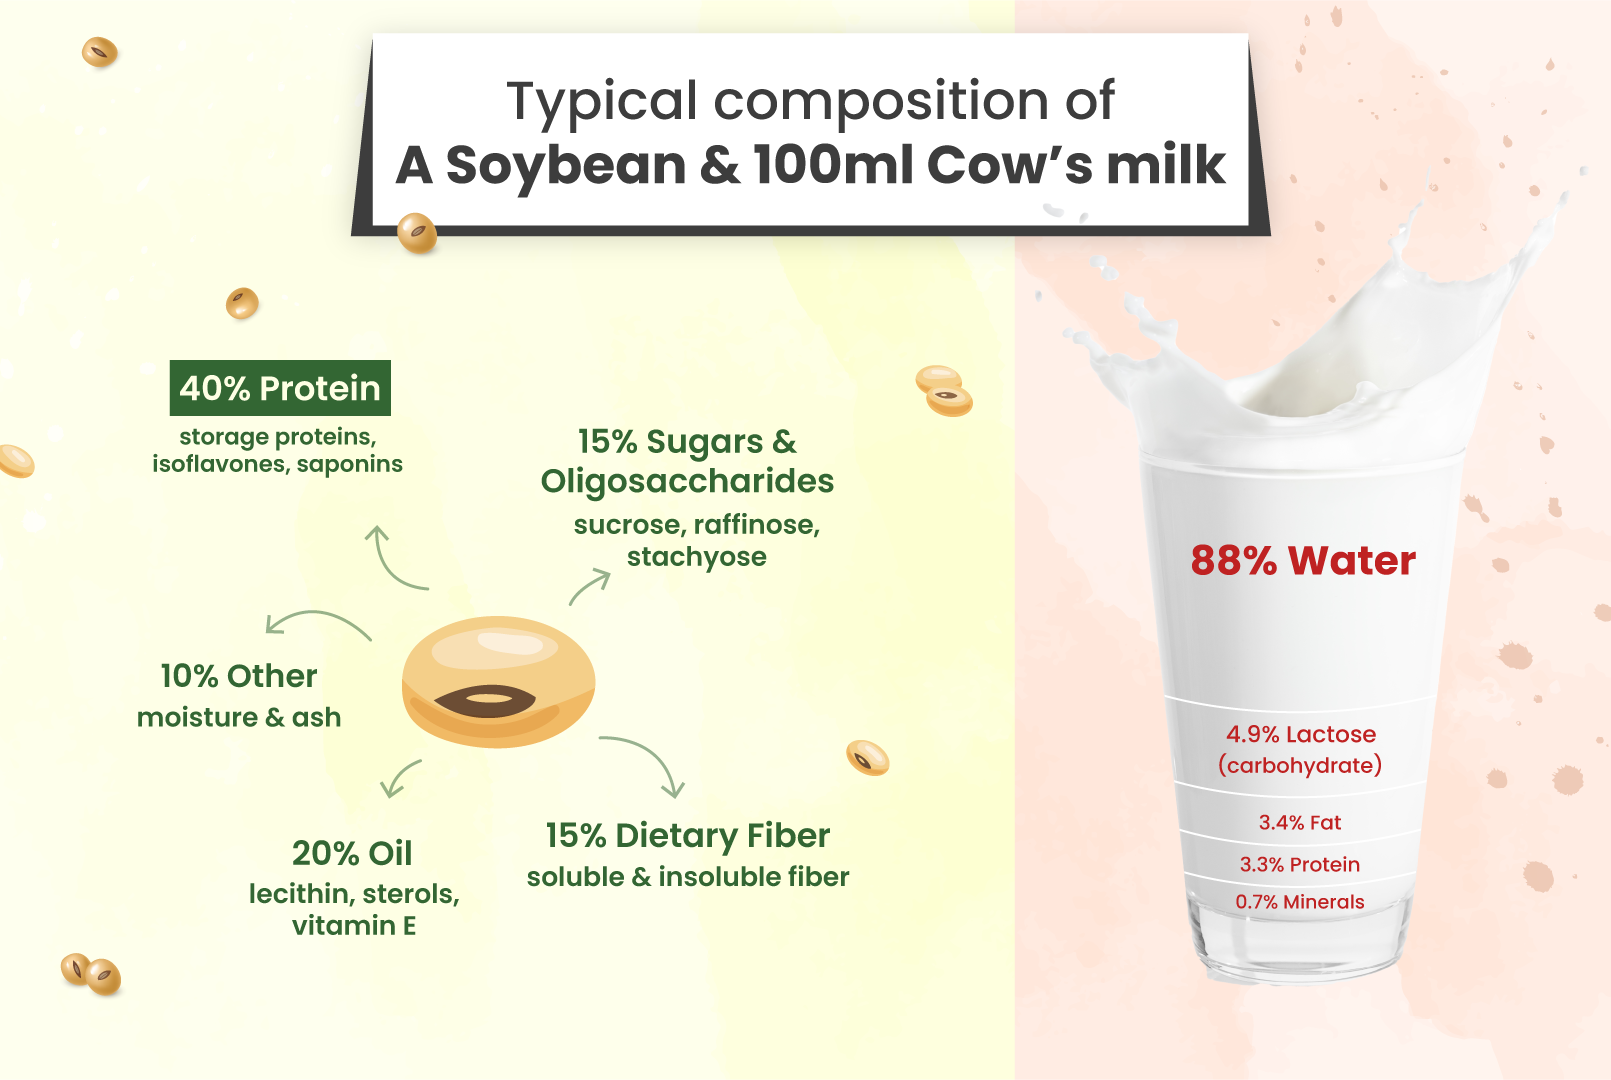 Typical composition of a Soybean & 100 ml Cow’s milk